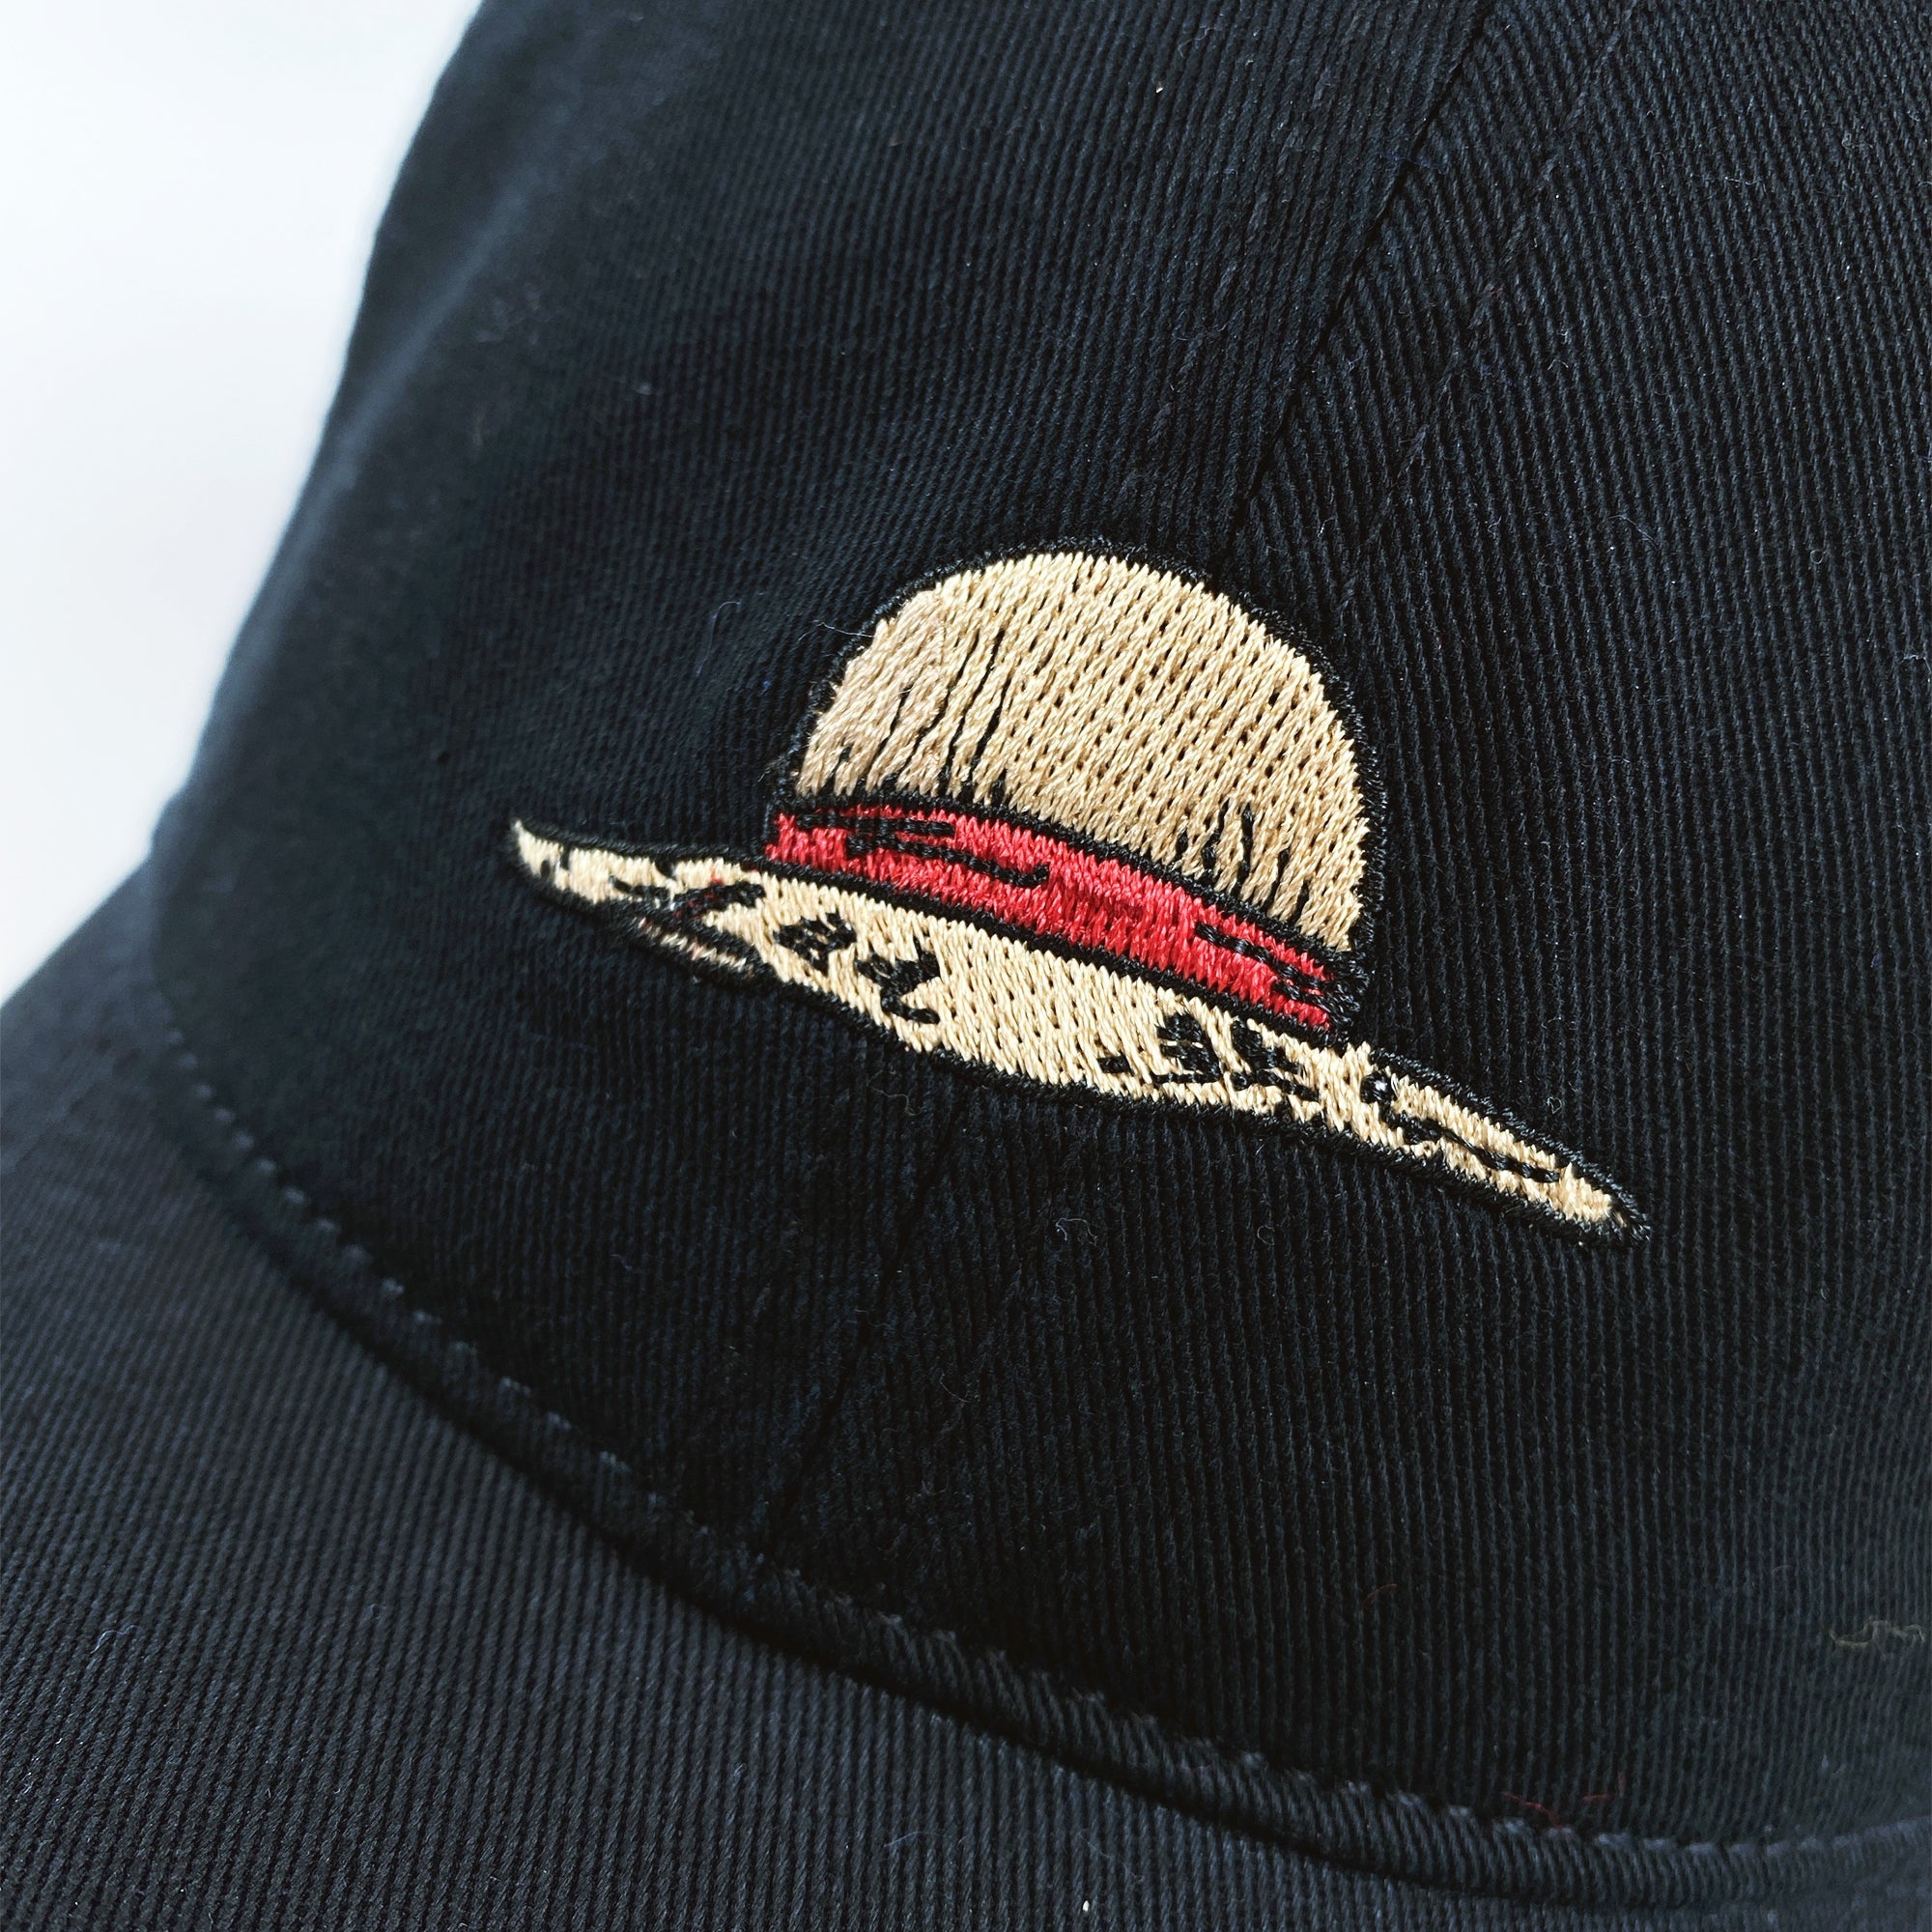 One Piece - Luffy's Hat Dad Hat image count 1